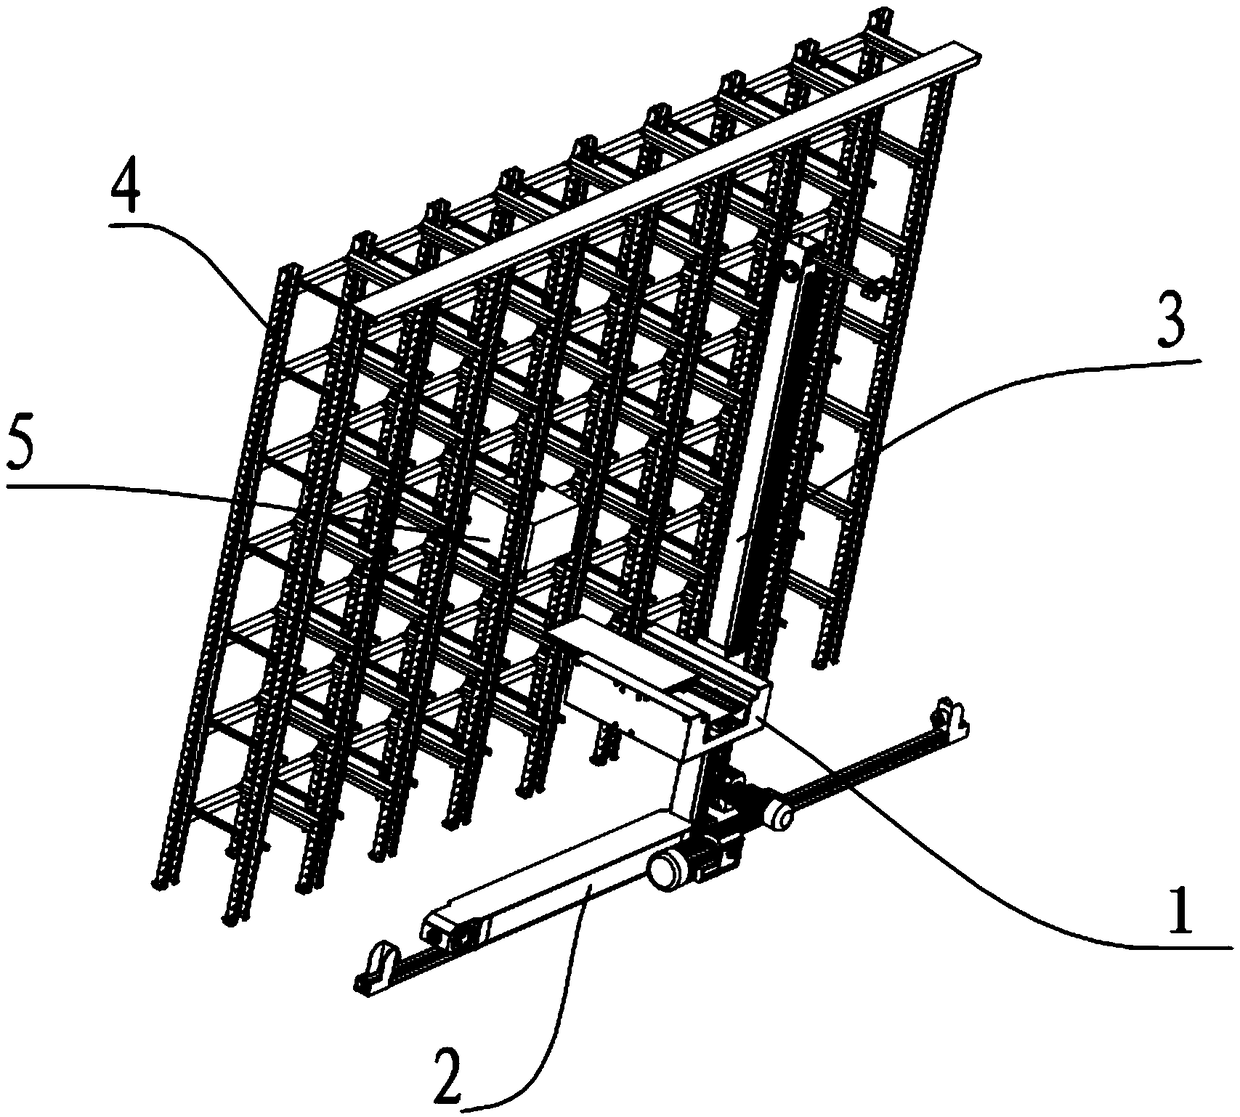 A palletizing process for goods